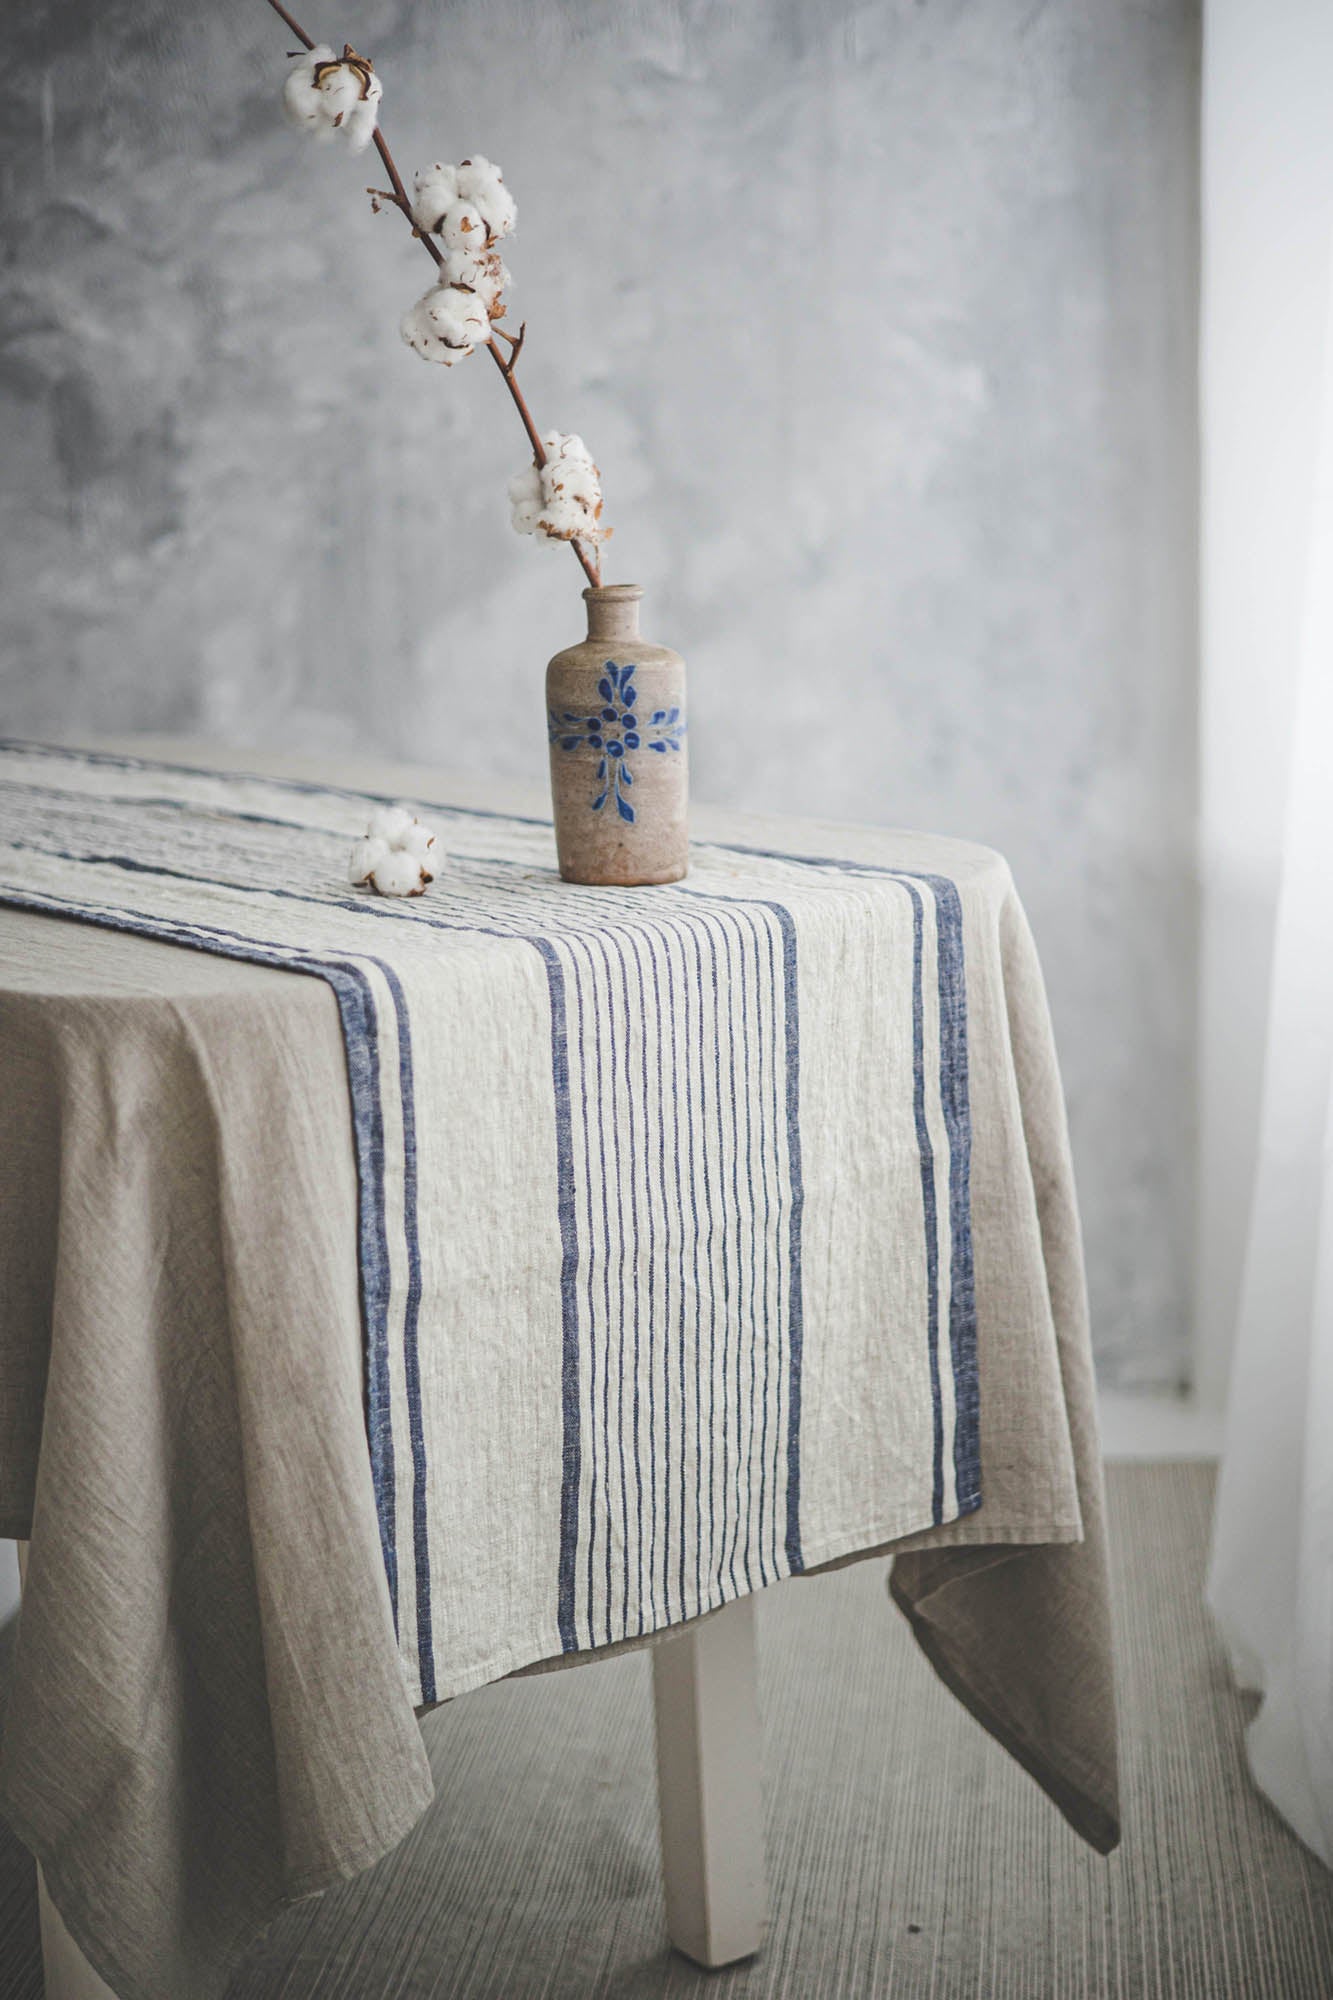 Linen table runner with blue stripes